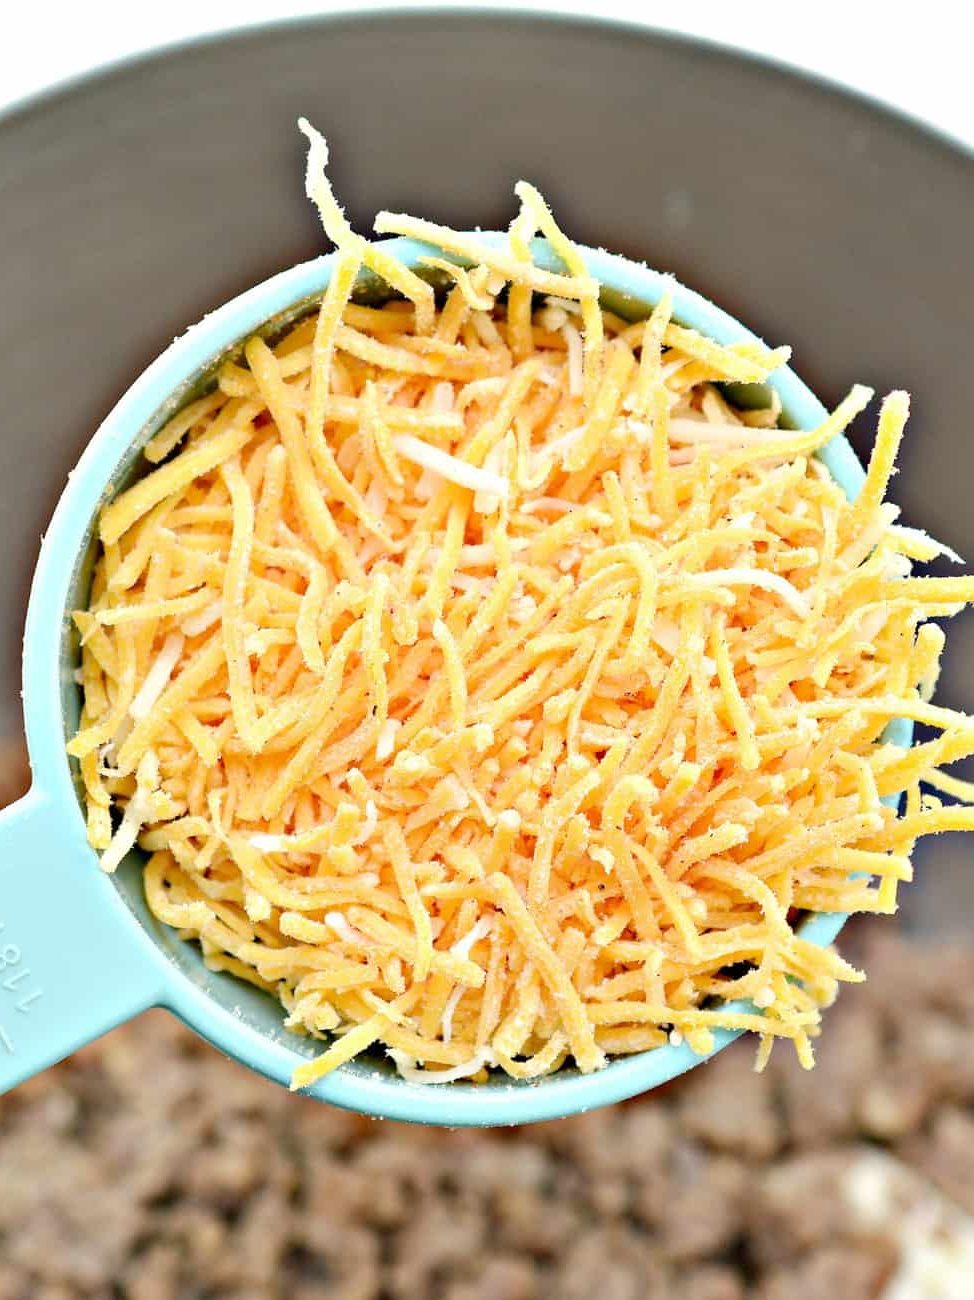 add shredded cheese of your choosing as well as pepper to taste. Stir to combine completely.